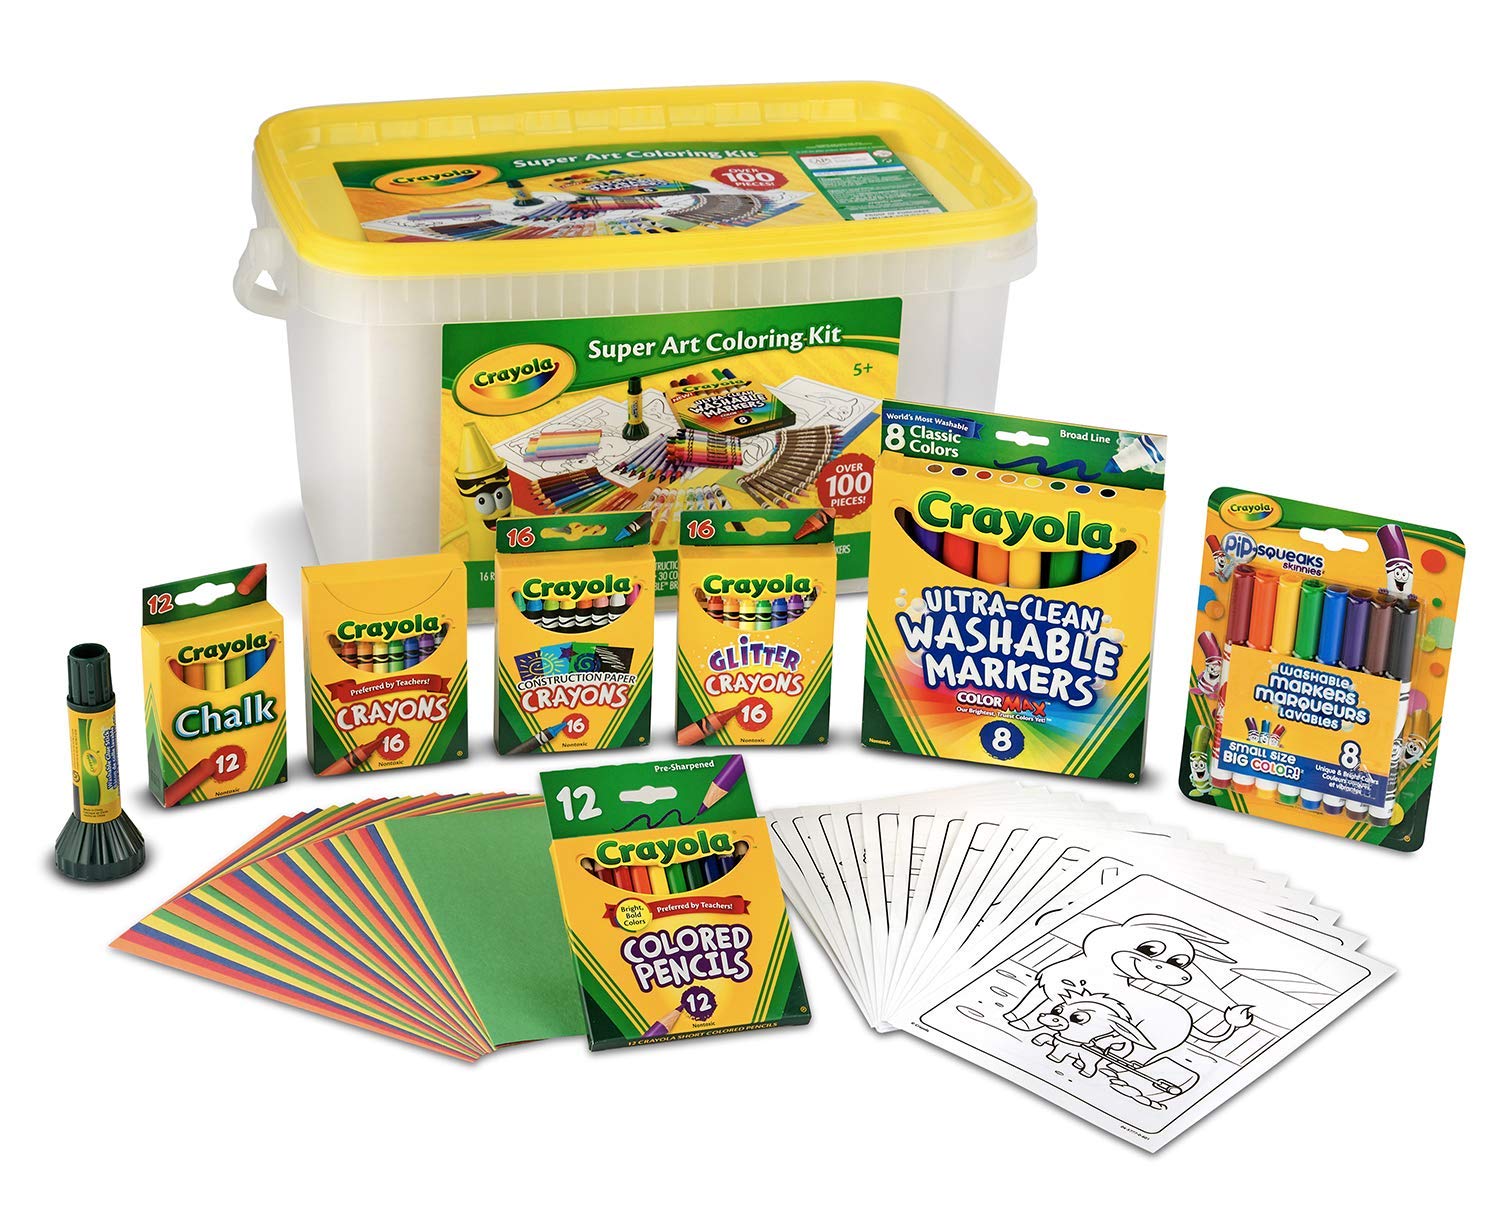 Lowest Price: Crayola Super Art Coloring Kit, Gift for Kids